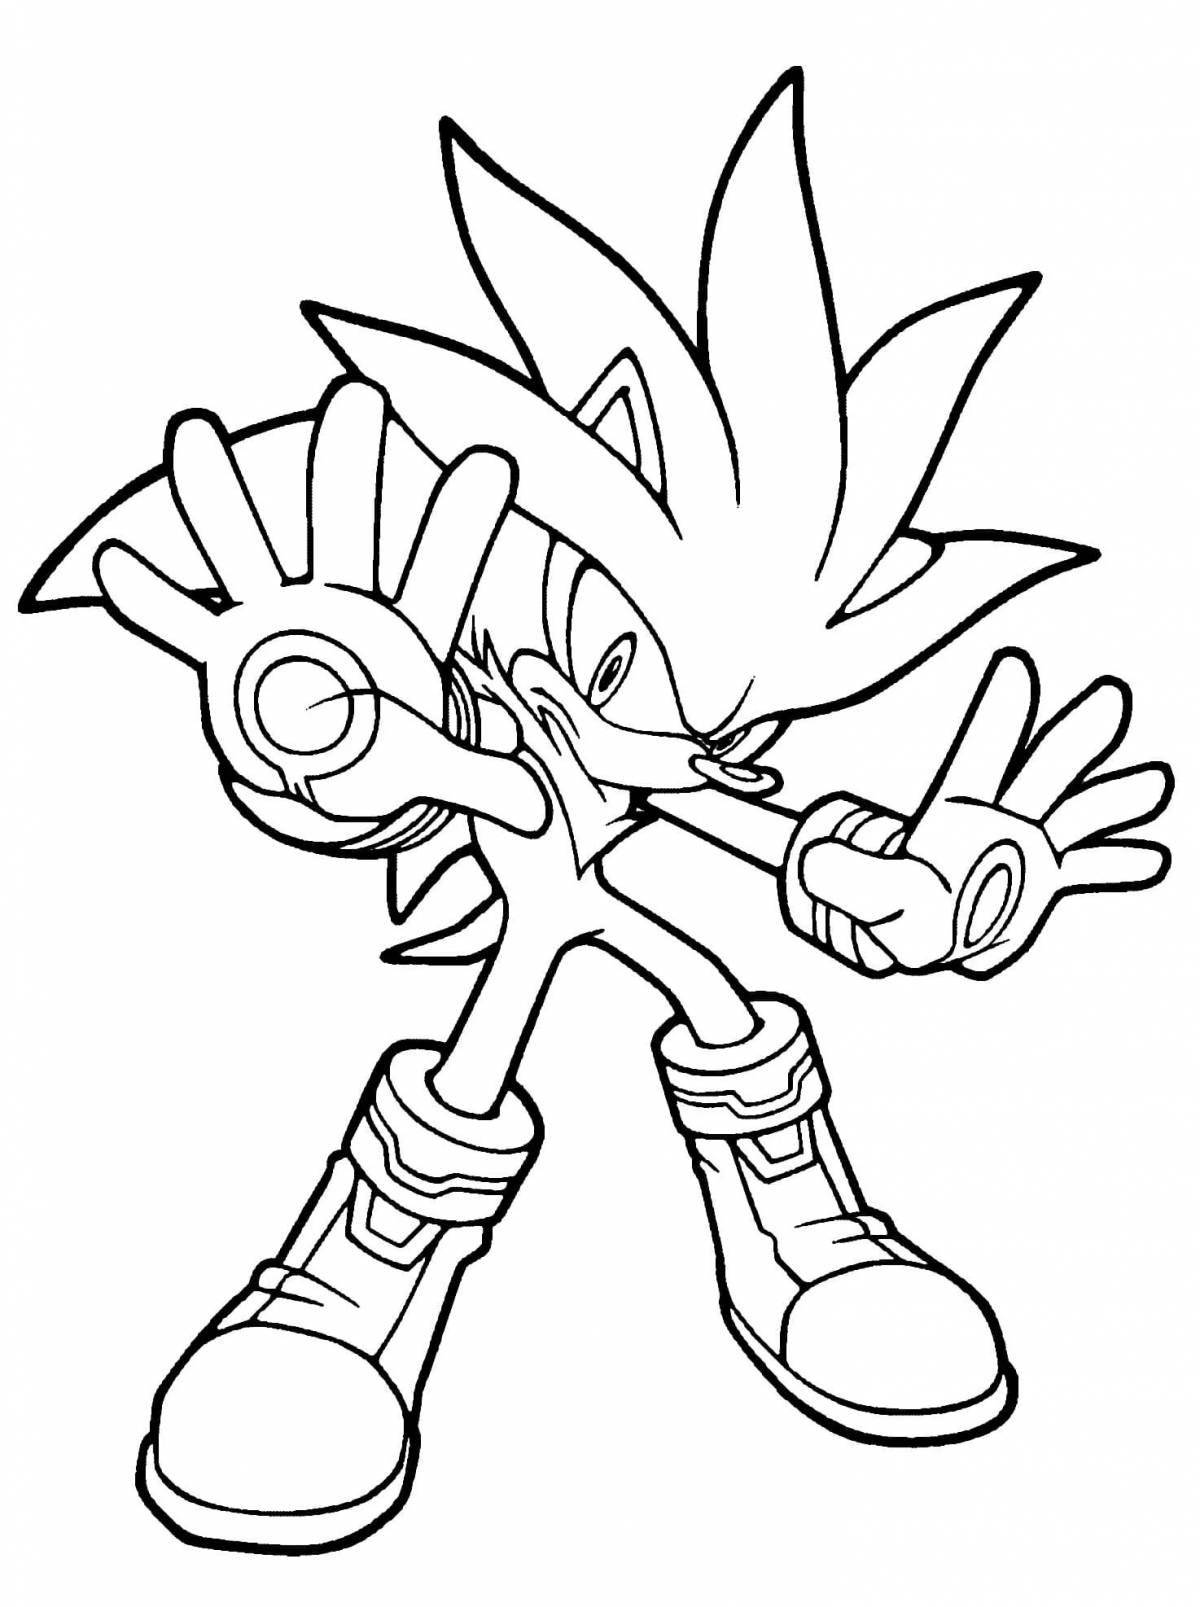 White sonic holiday coloring